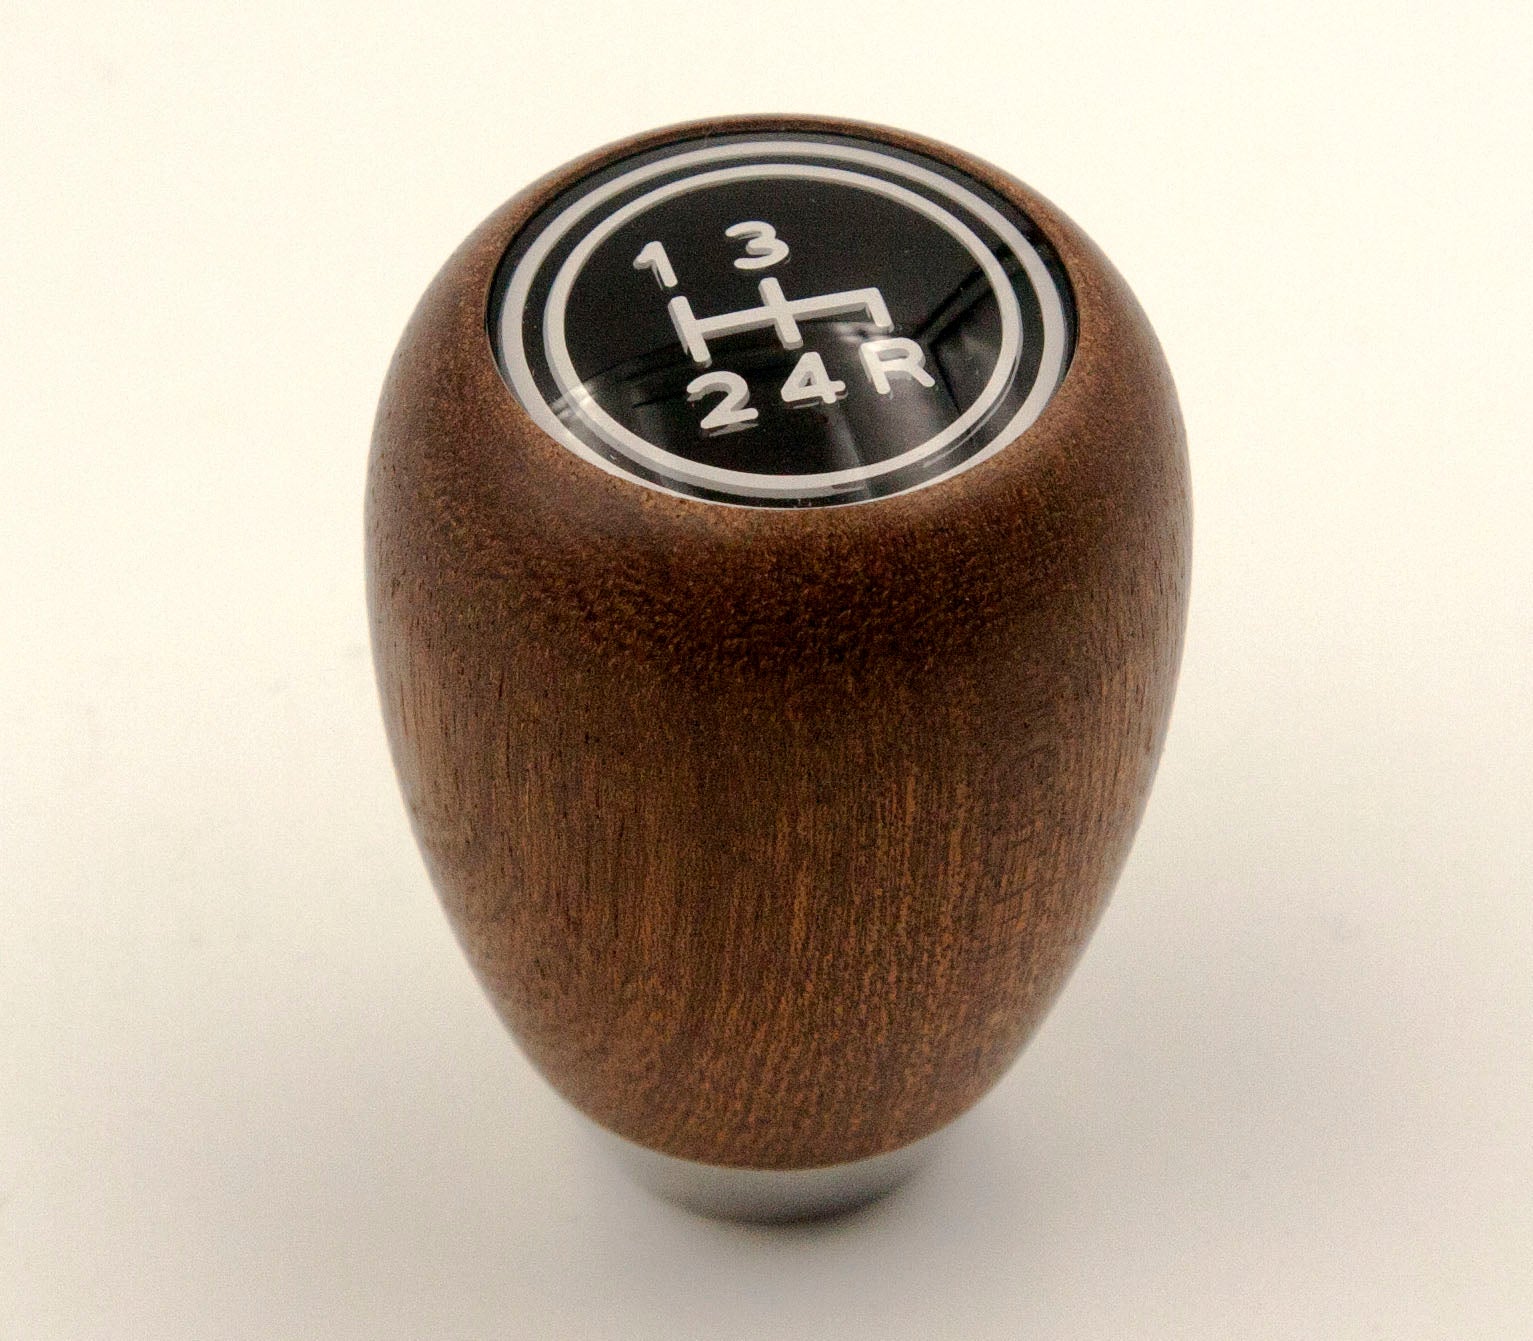 Easy woodturning project - gear shift knob 